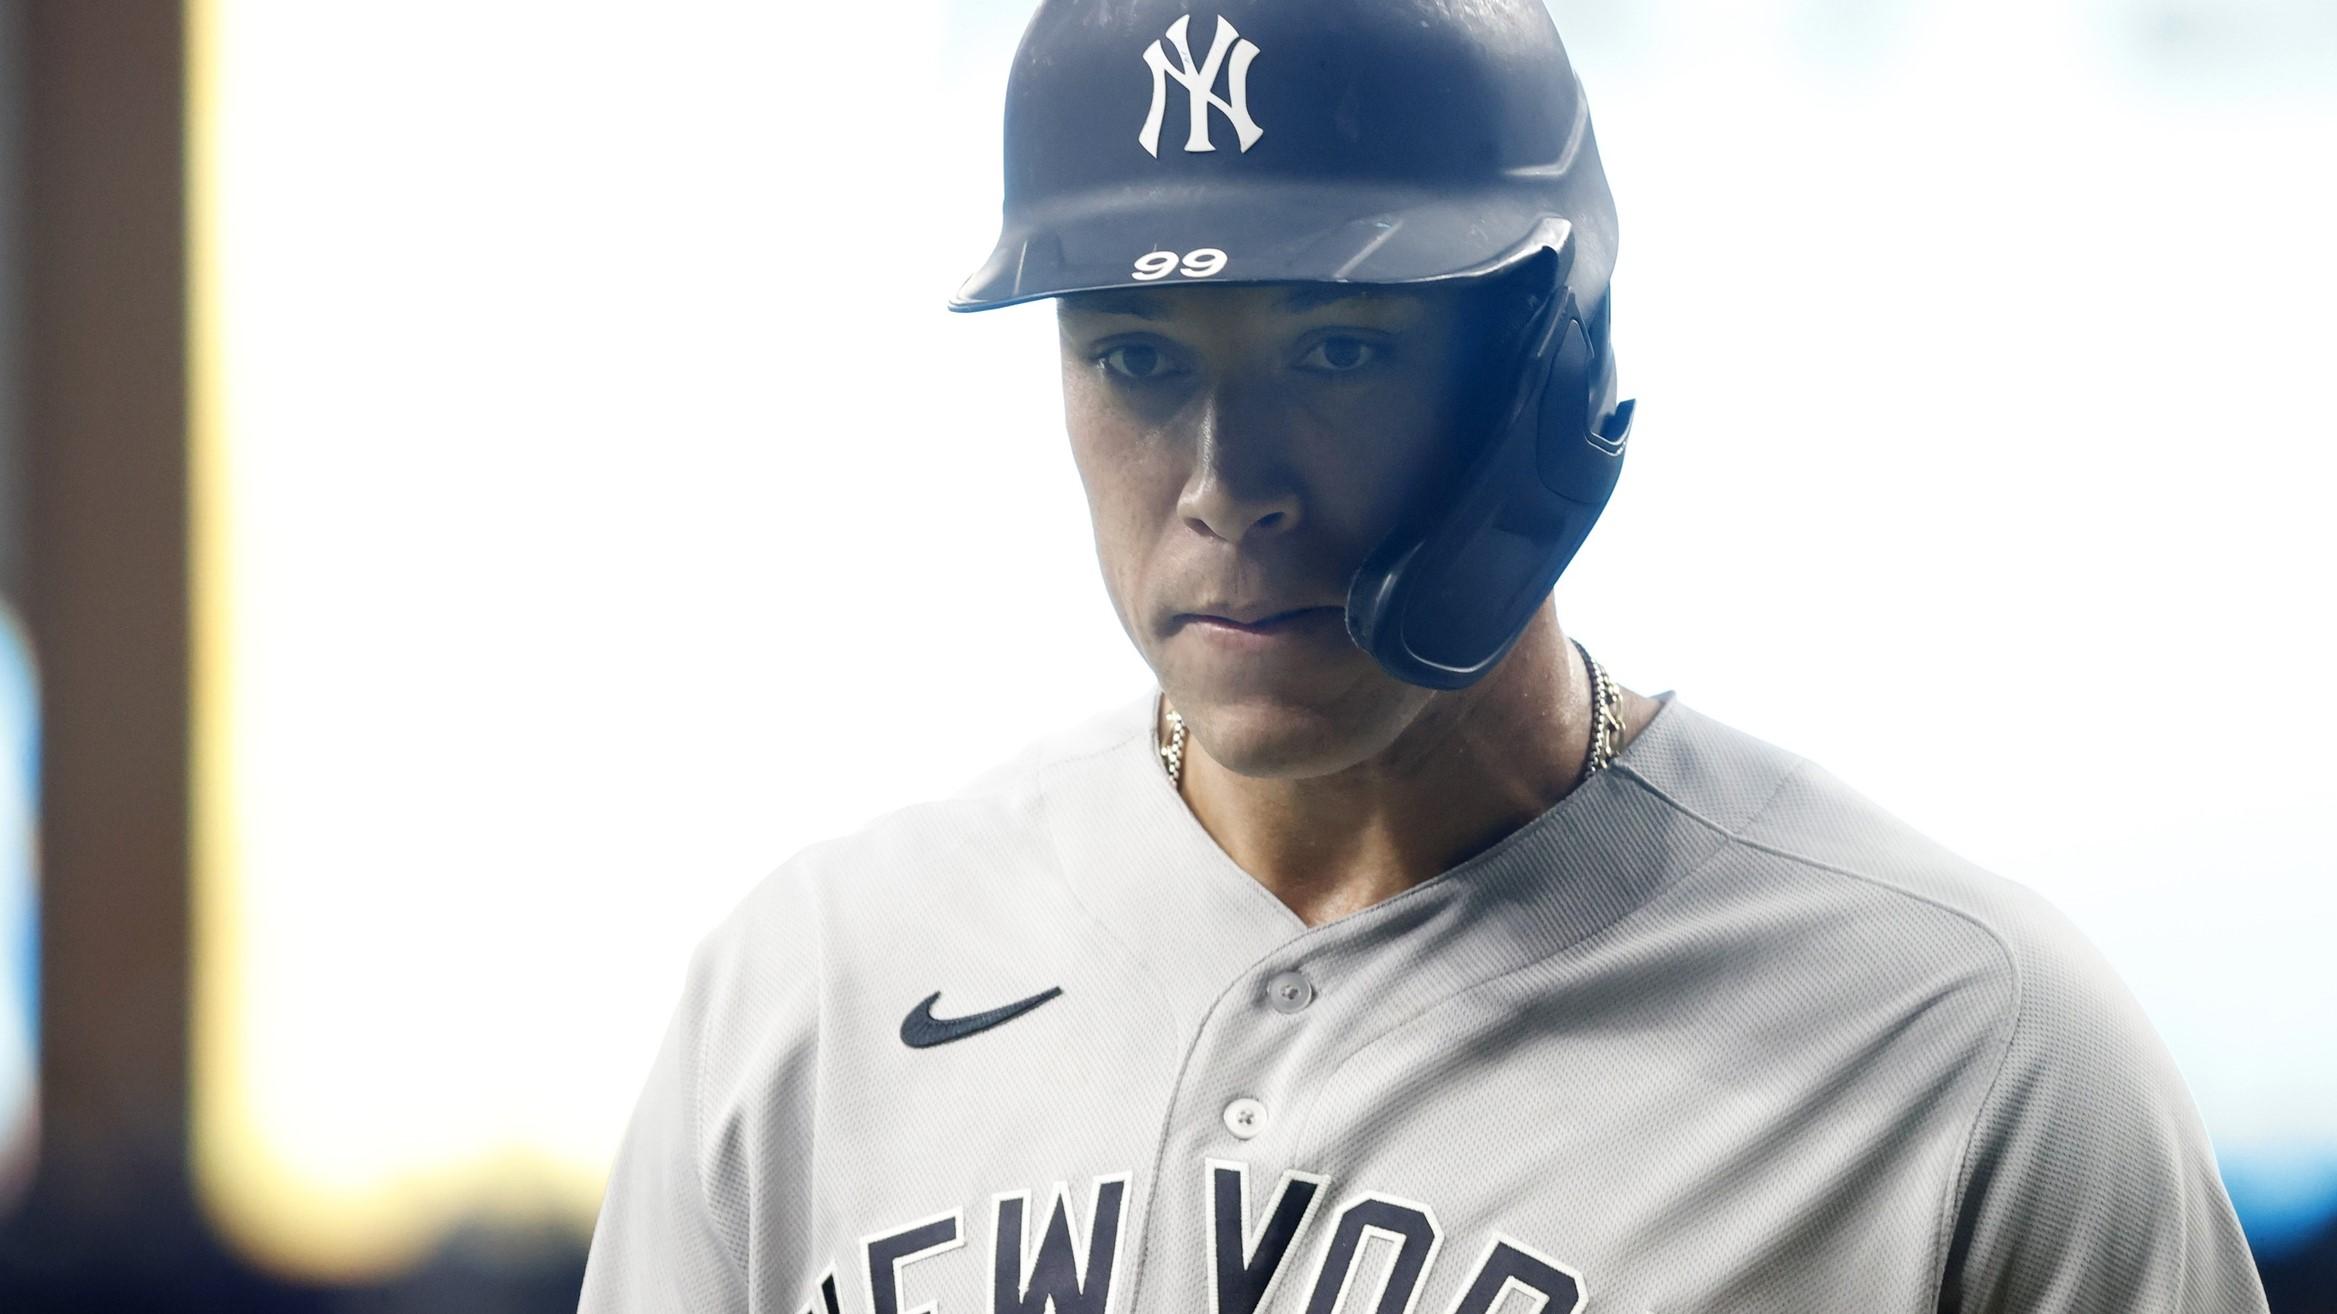 Yankees' Aaron Judge not in Wednesday's starting lineup, considered day-to-day